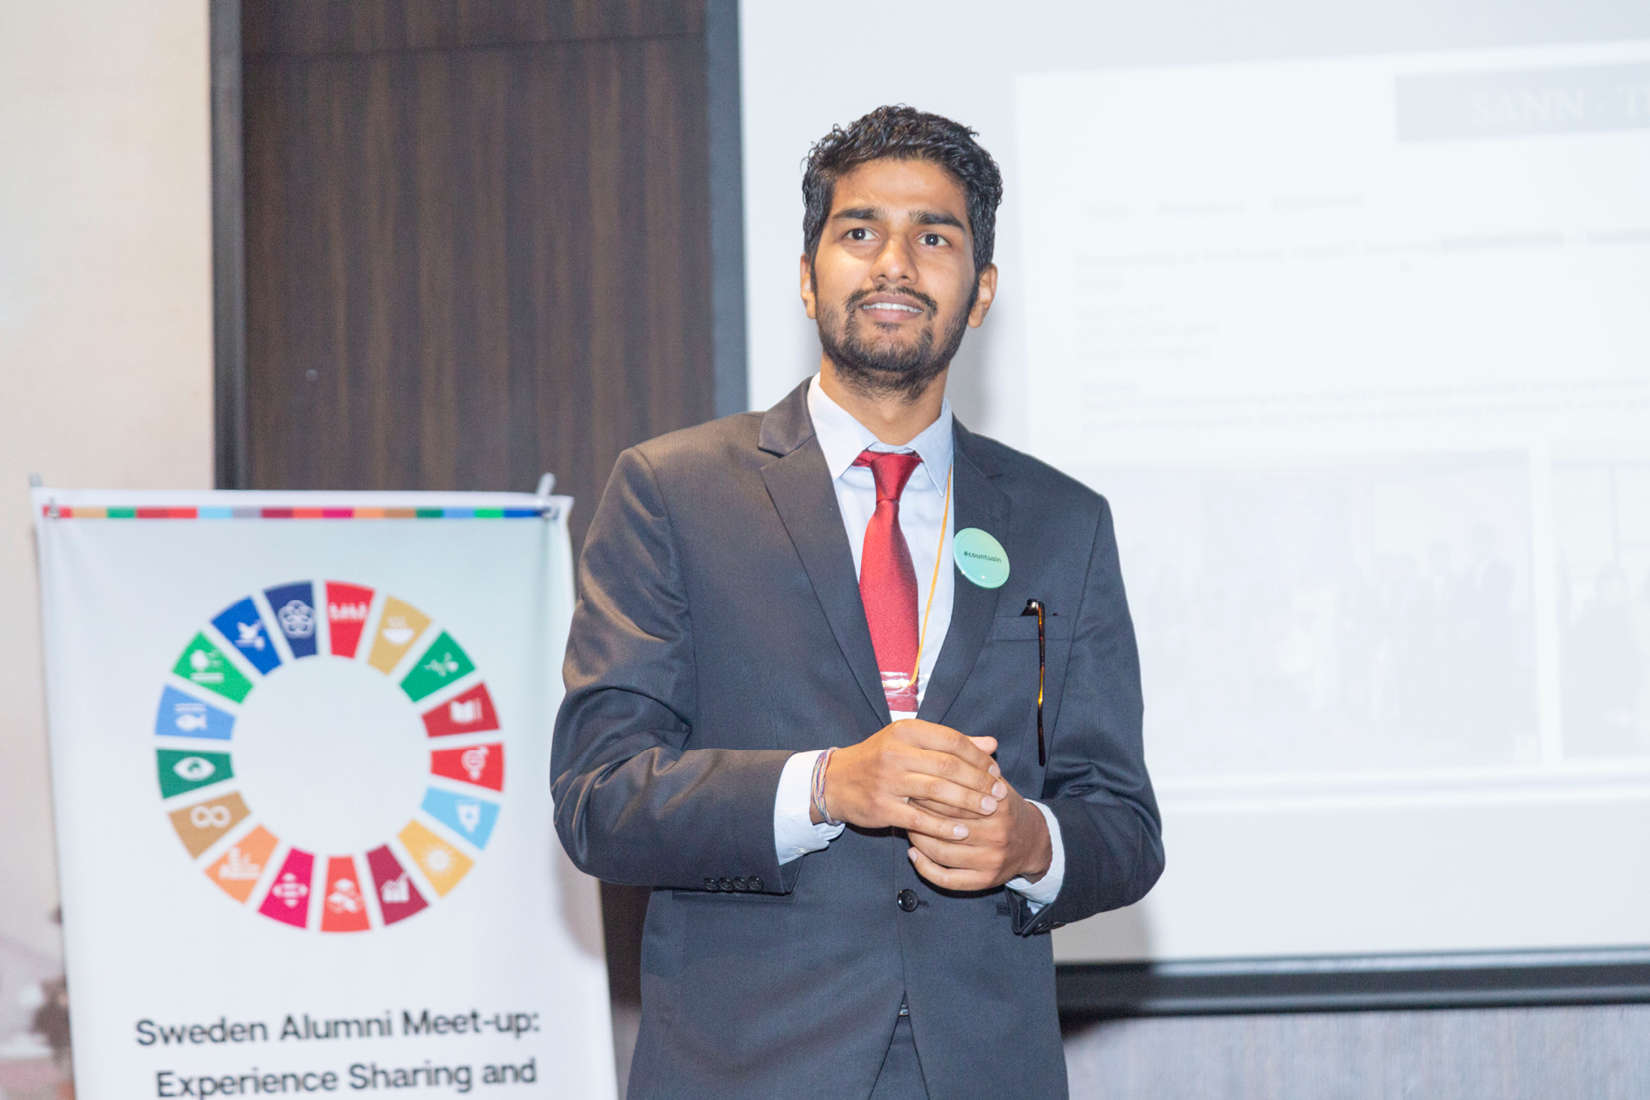 Raj standing in front of an illustration of the UN Sustainable Development Goals.